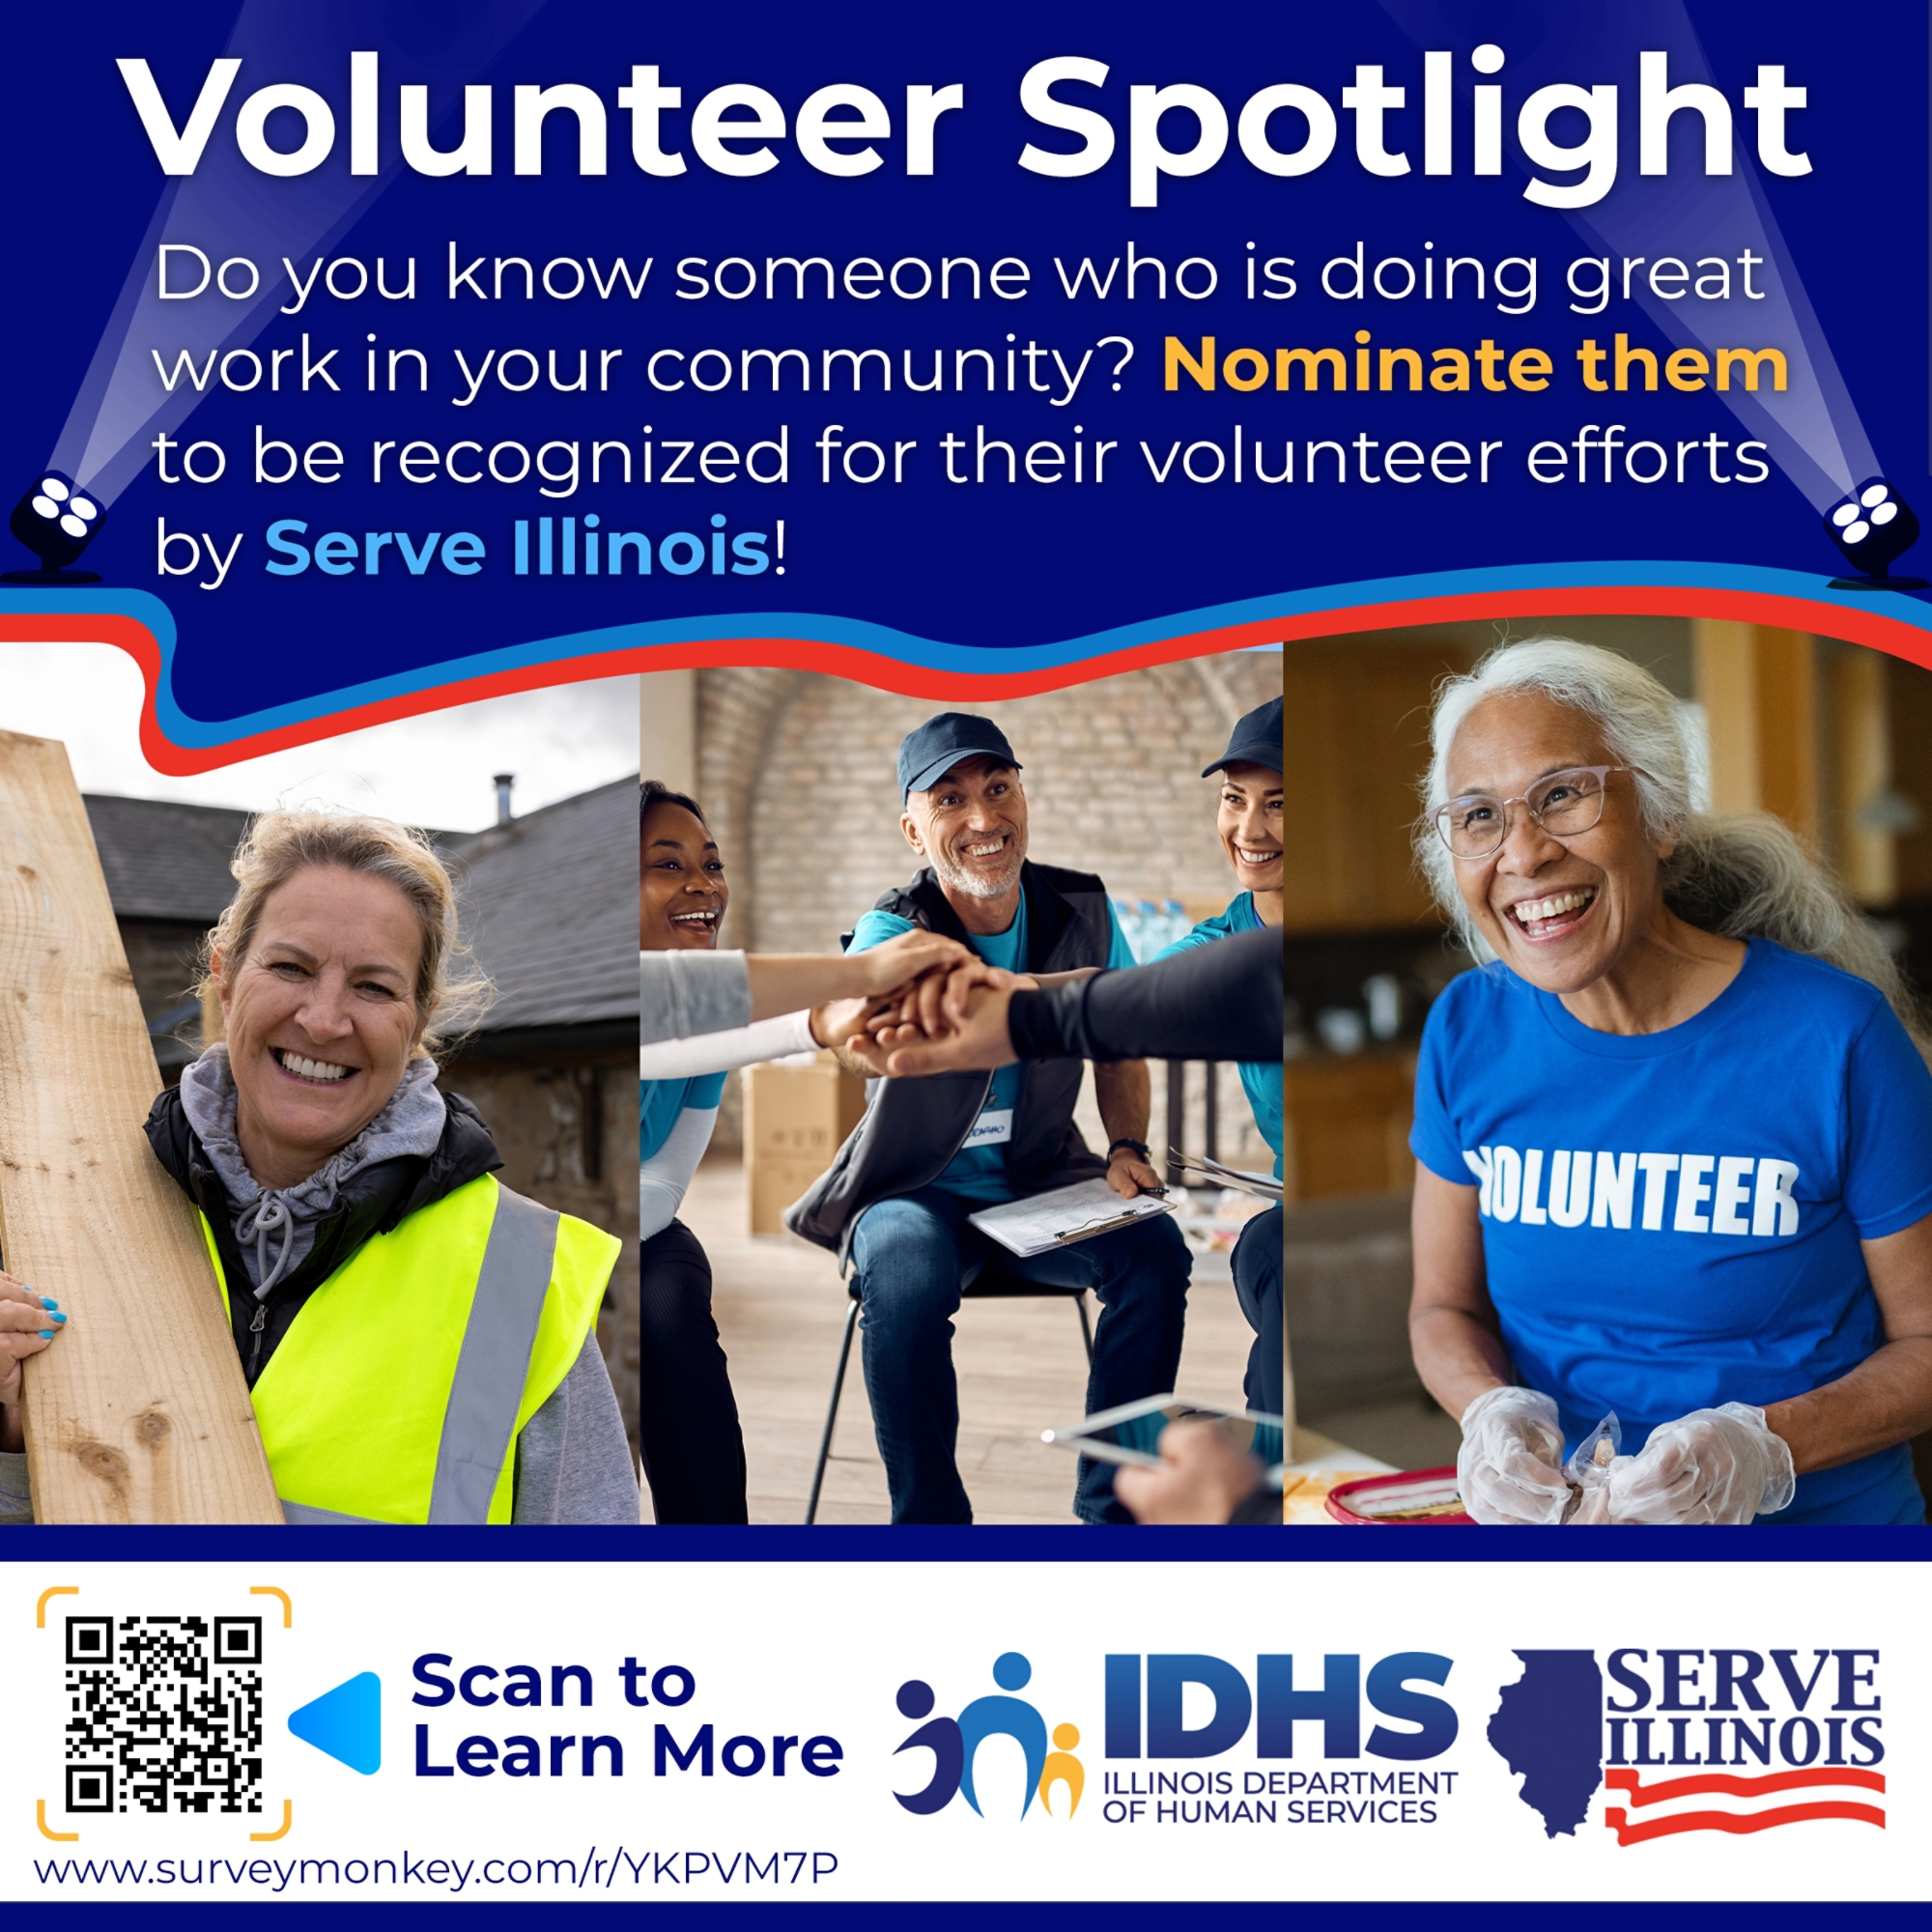 Volunteer Spotlight nomination graphic "Do you know someone who is doing great work in your community? Nominate them to be recognized for thier volunteer efforts by Serve Illinois!"